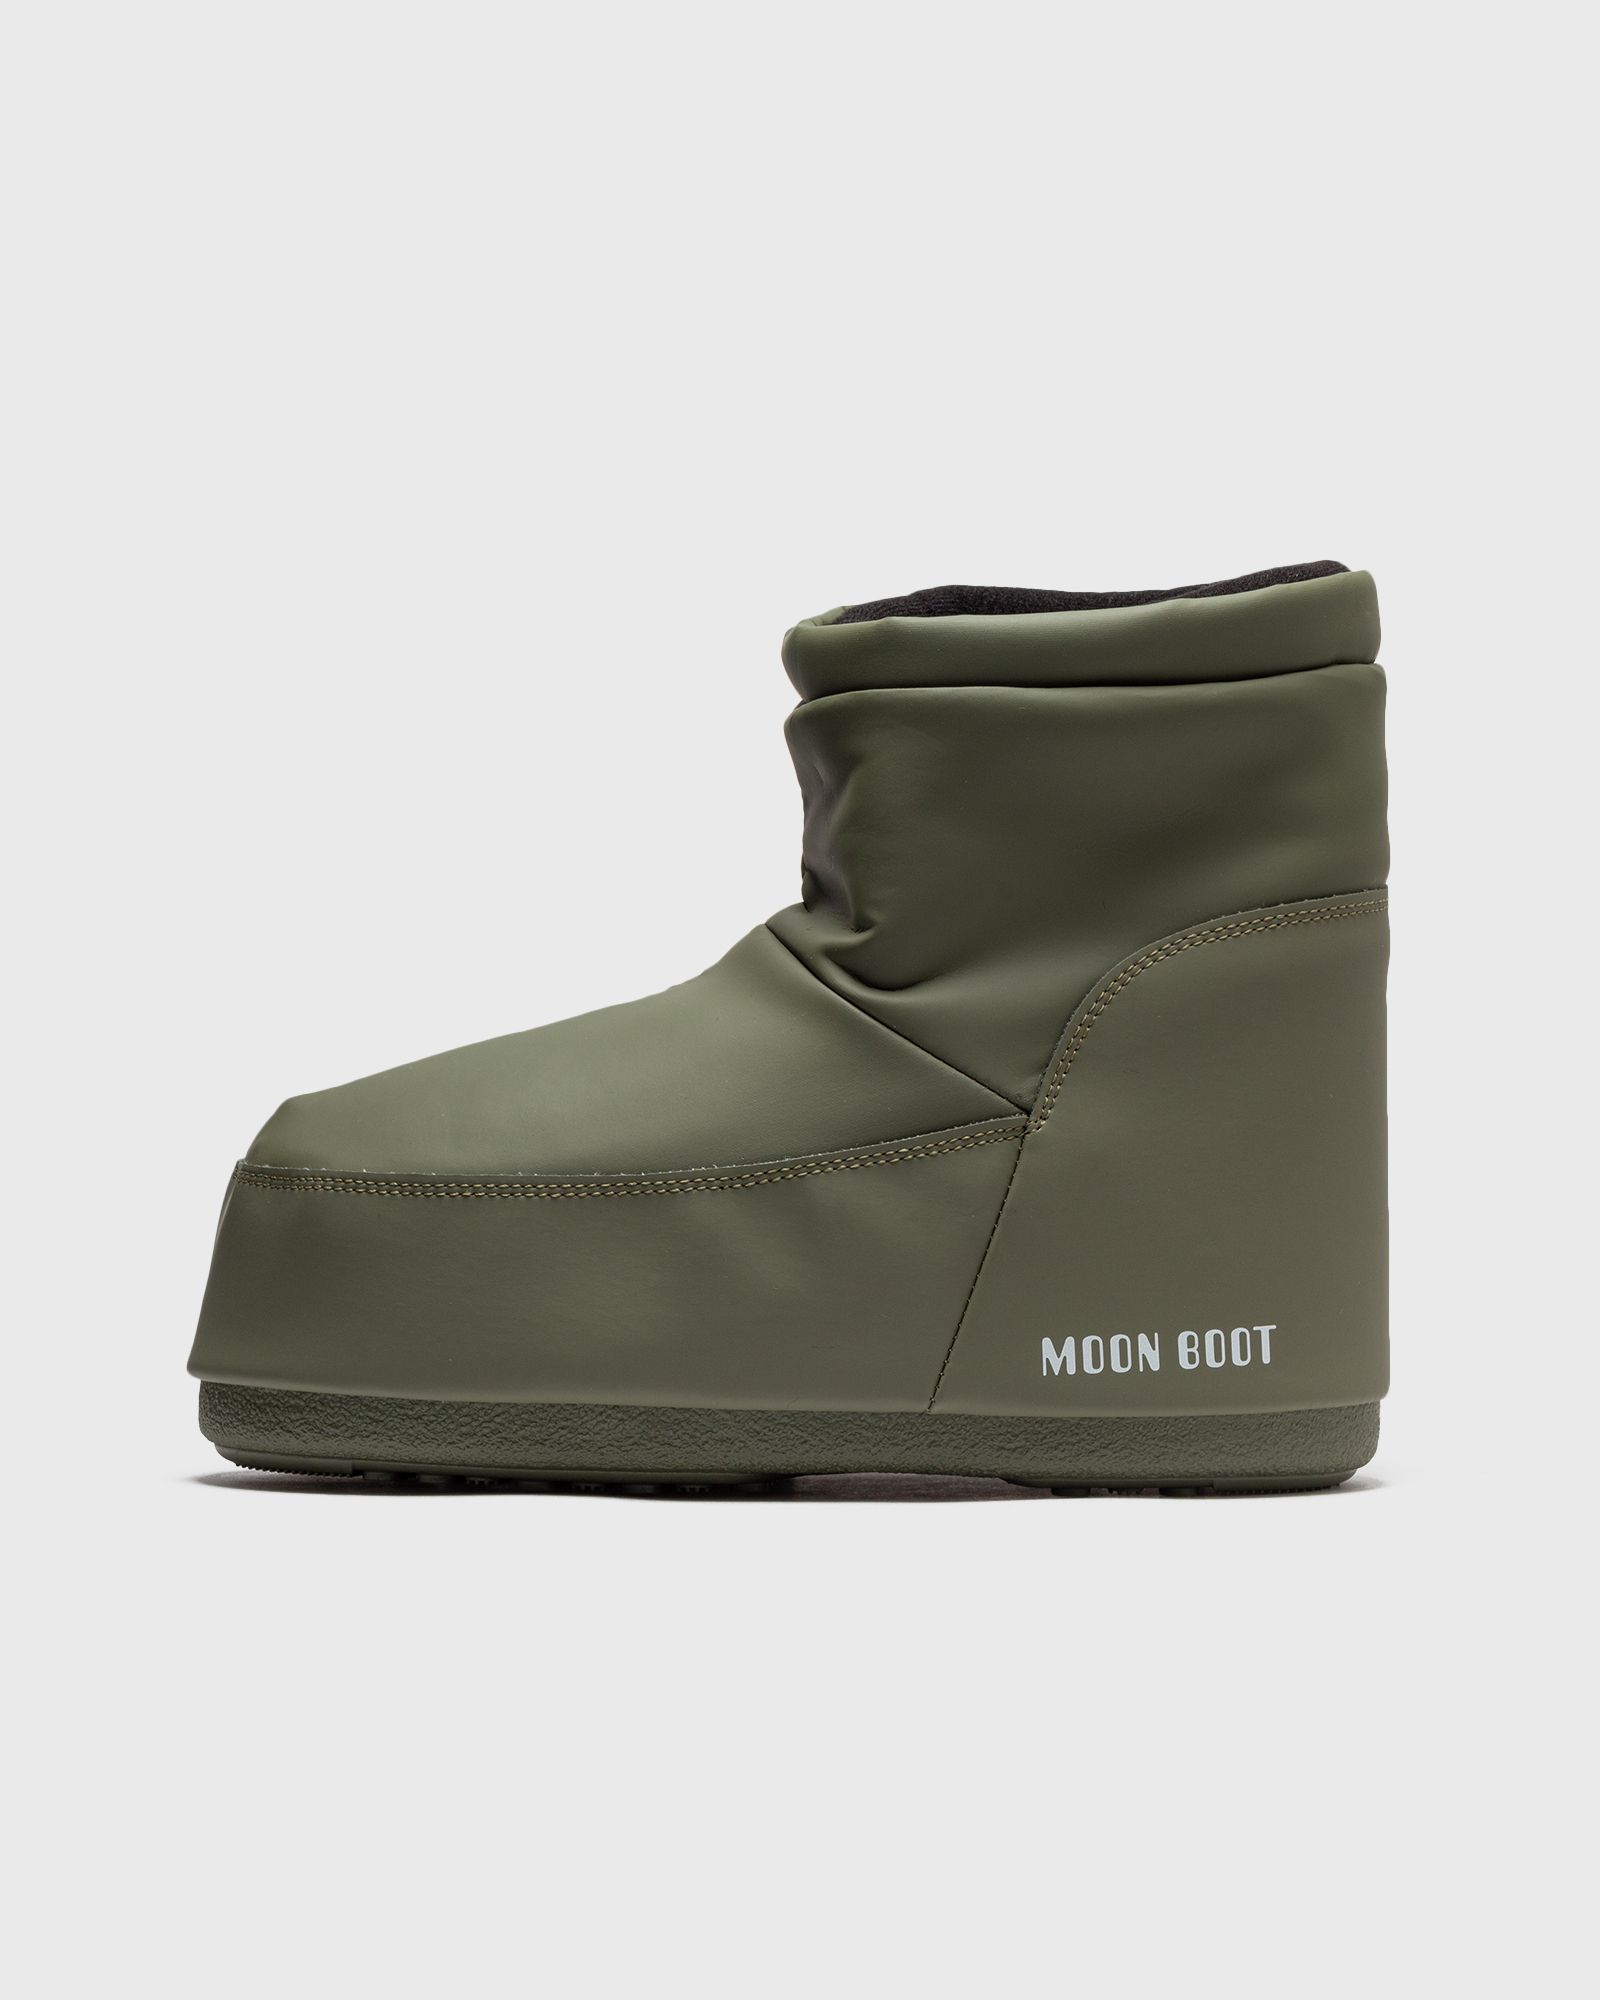 Moon Boot MOONBOOT ICON LOW NOLACE RUBB men Boots green in Größe:36-38 von Moon Boot